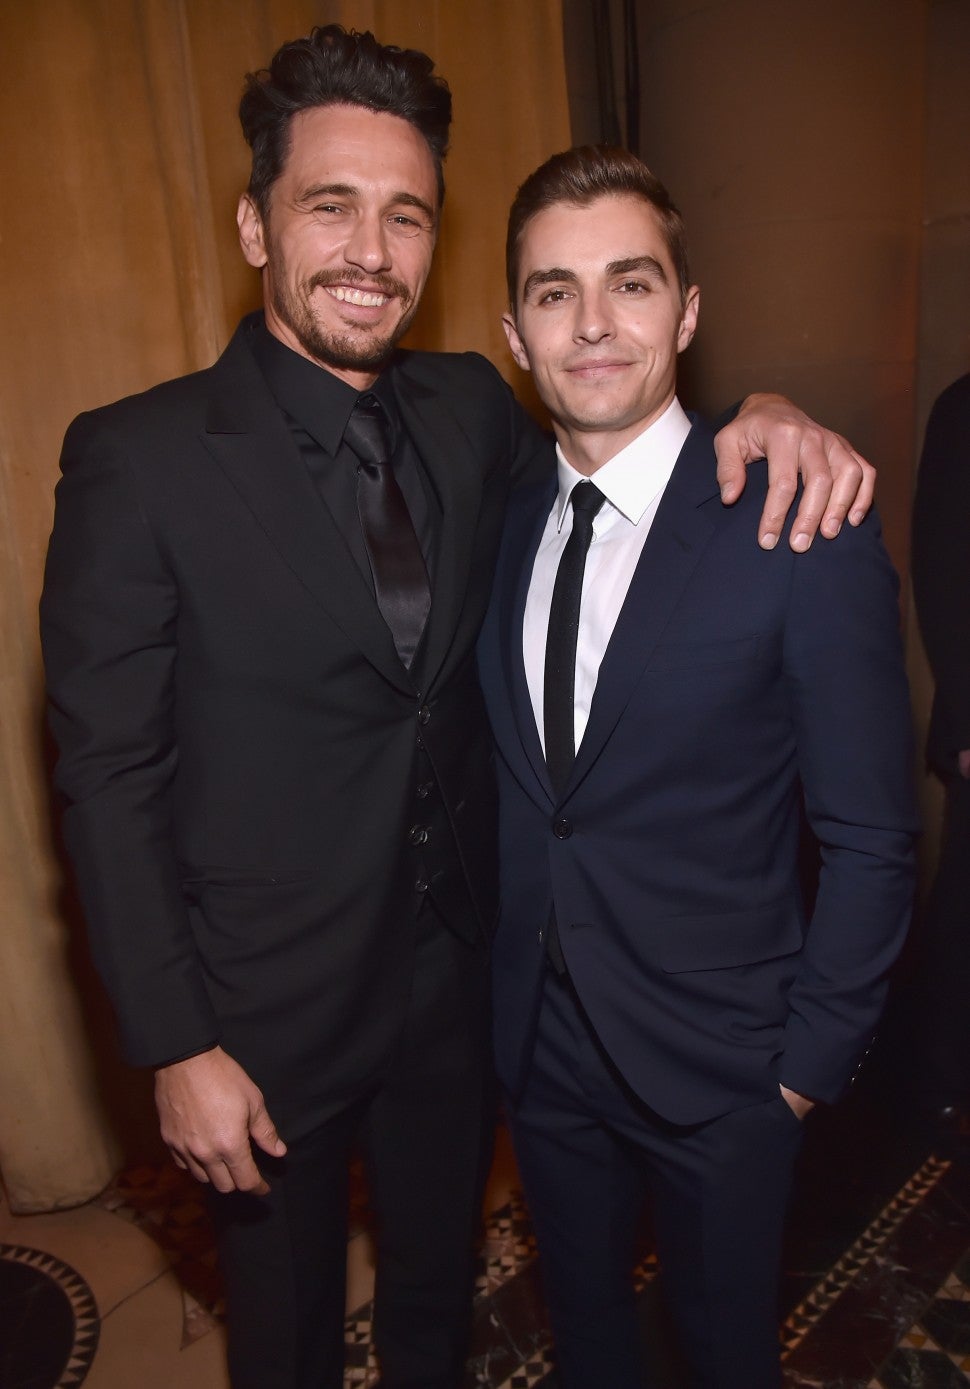 James Franco and Dave Franco at the National Board of Review Annual Awards Gala